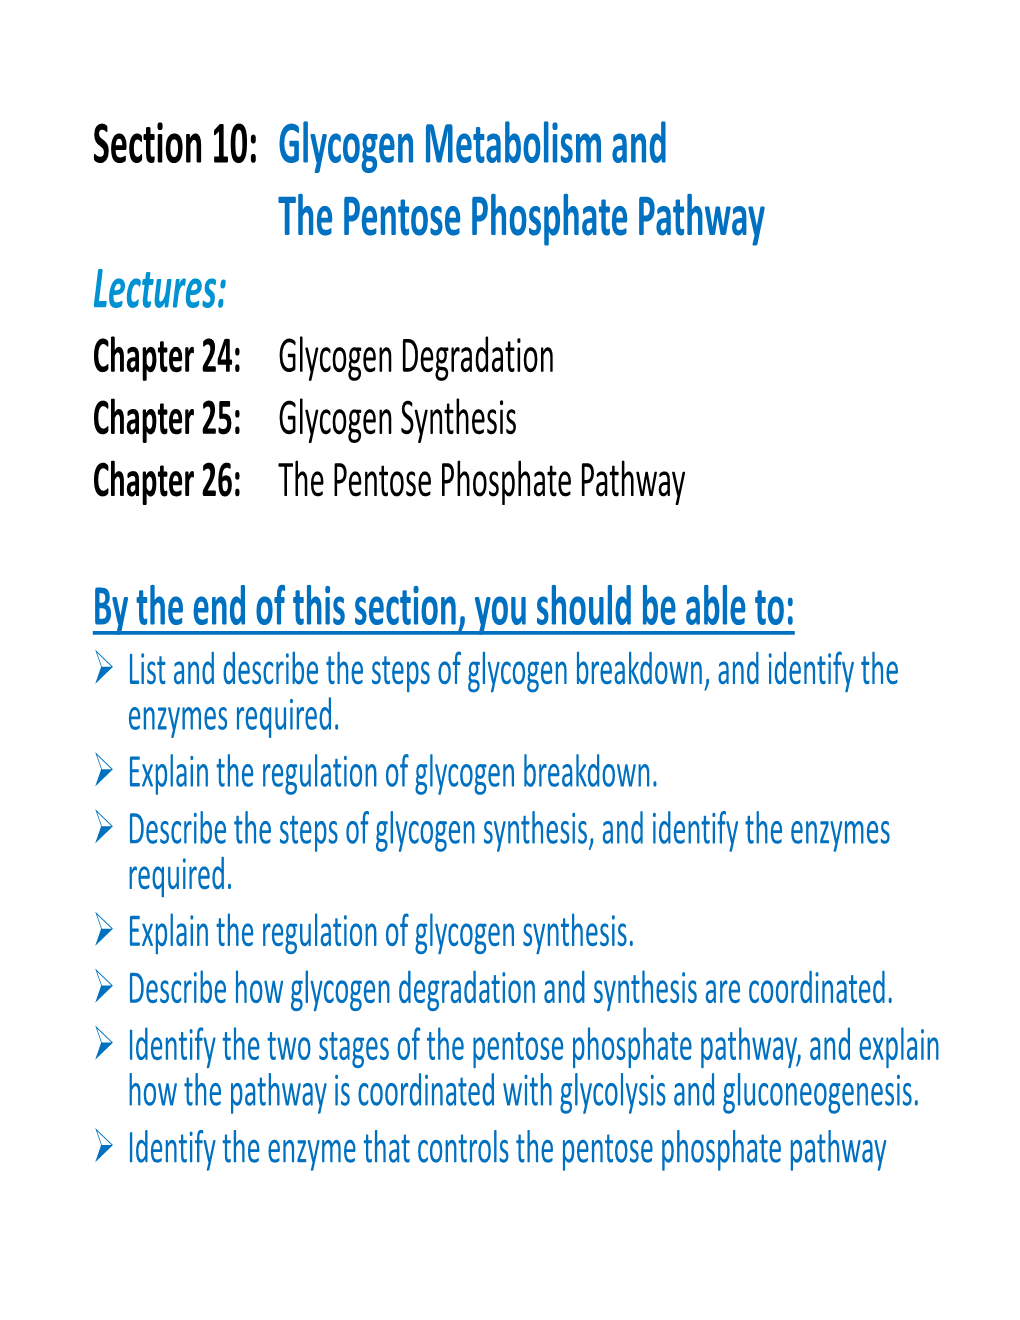 Glycogen Metabolism and the Pentose Phosphate Pathway Lectures